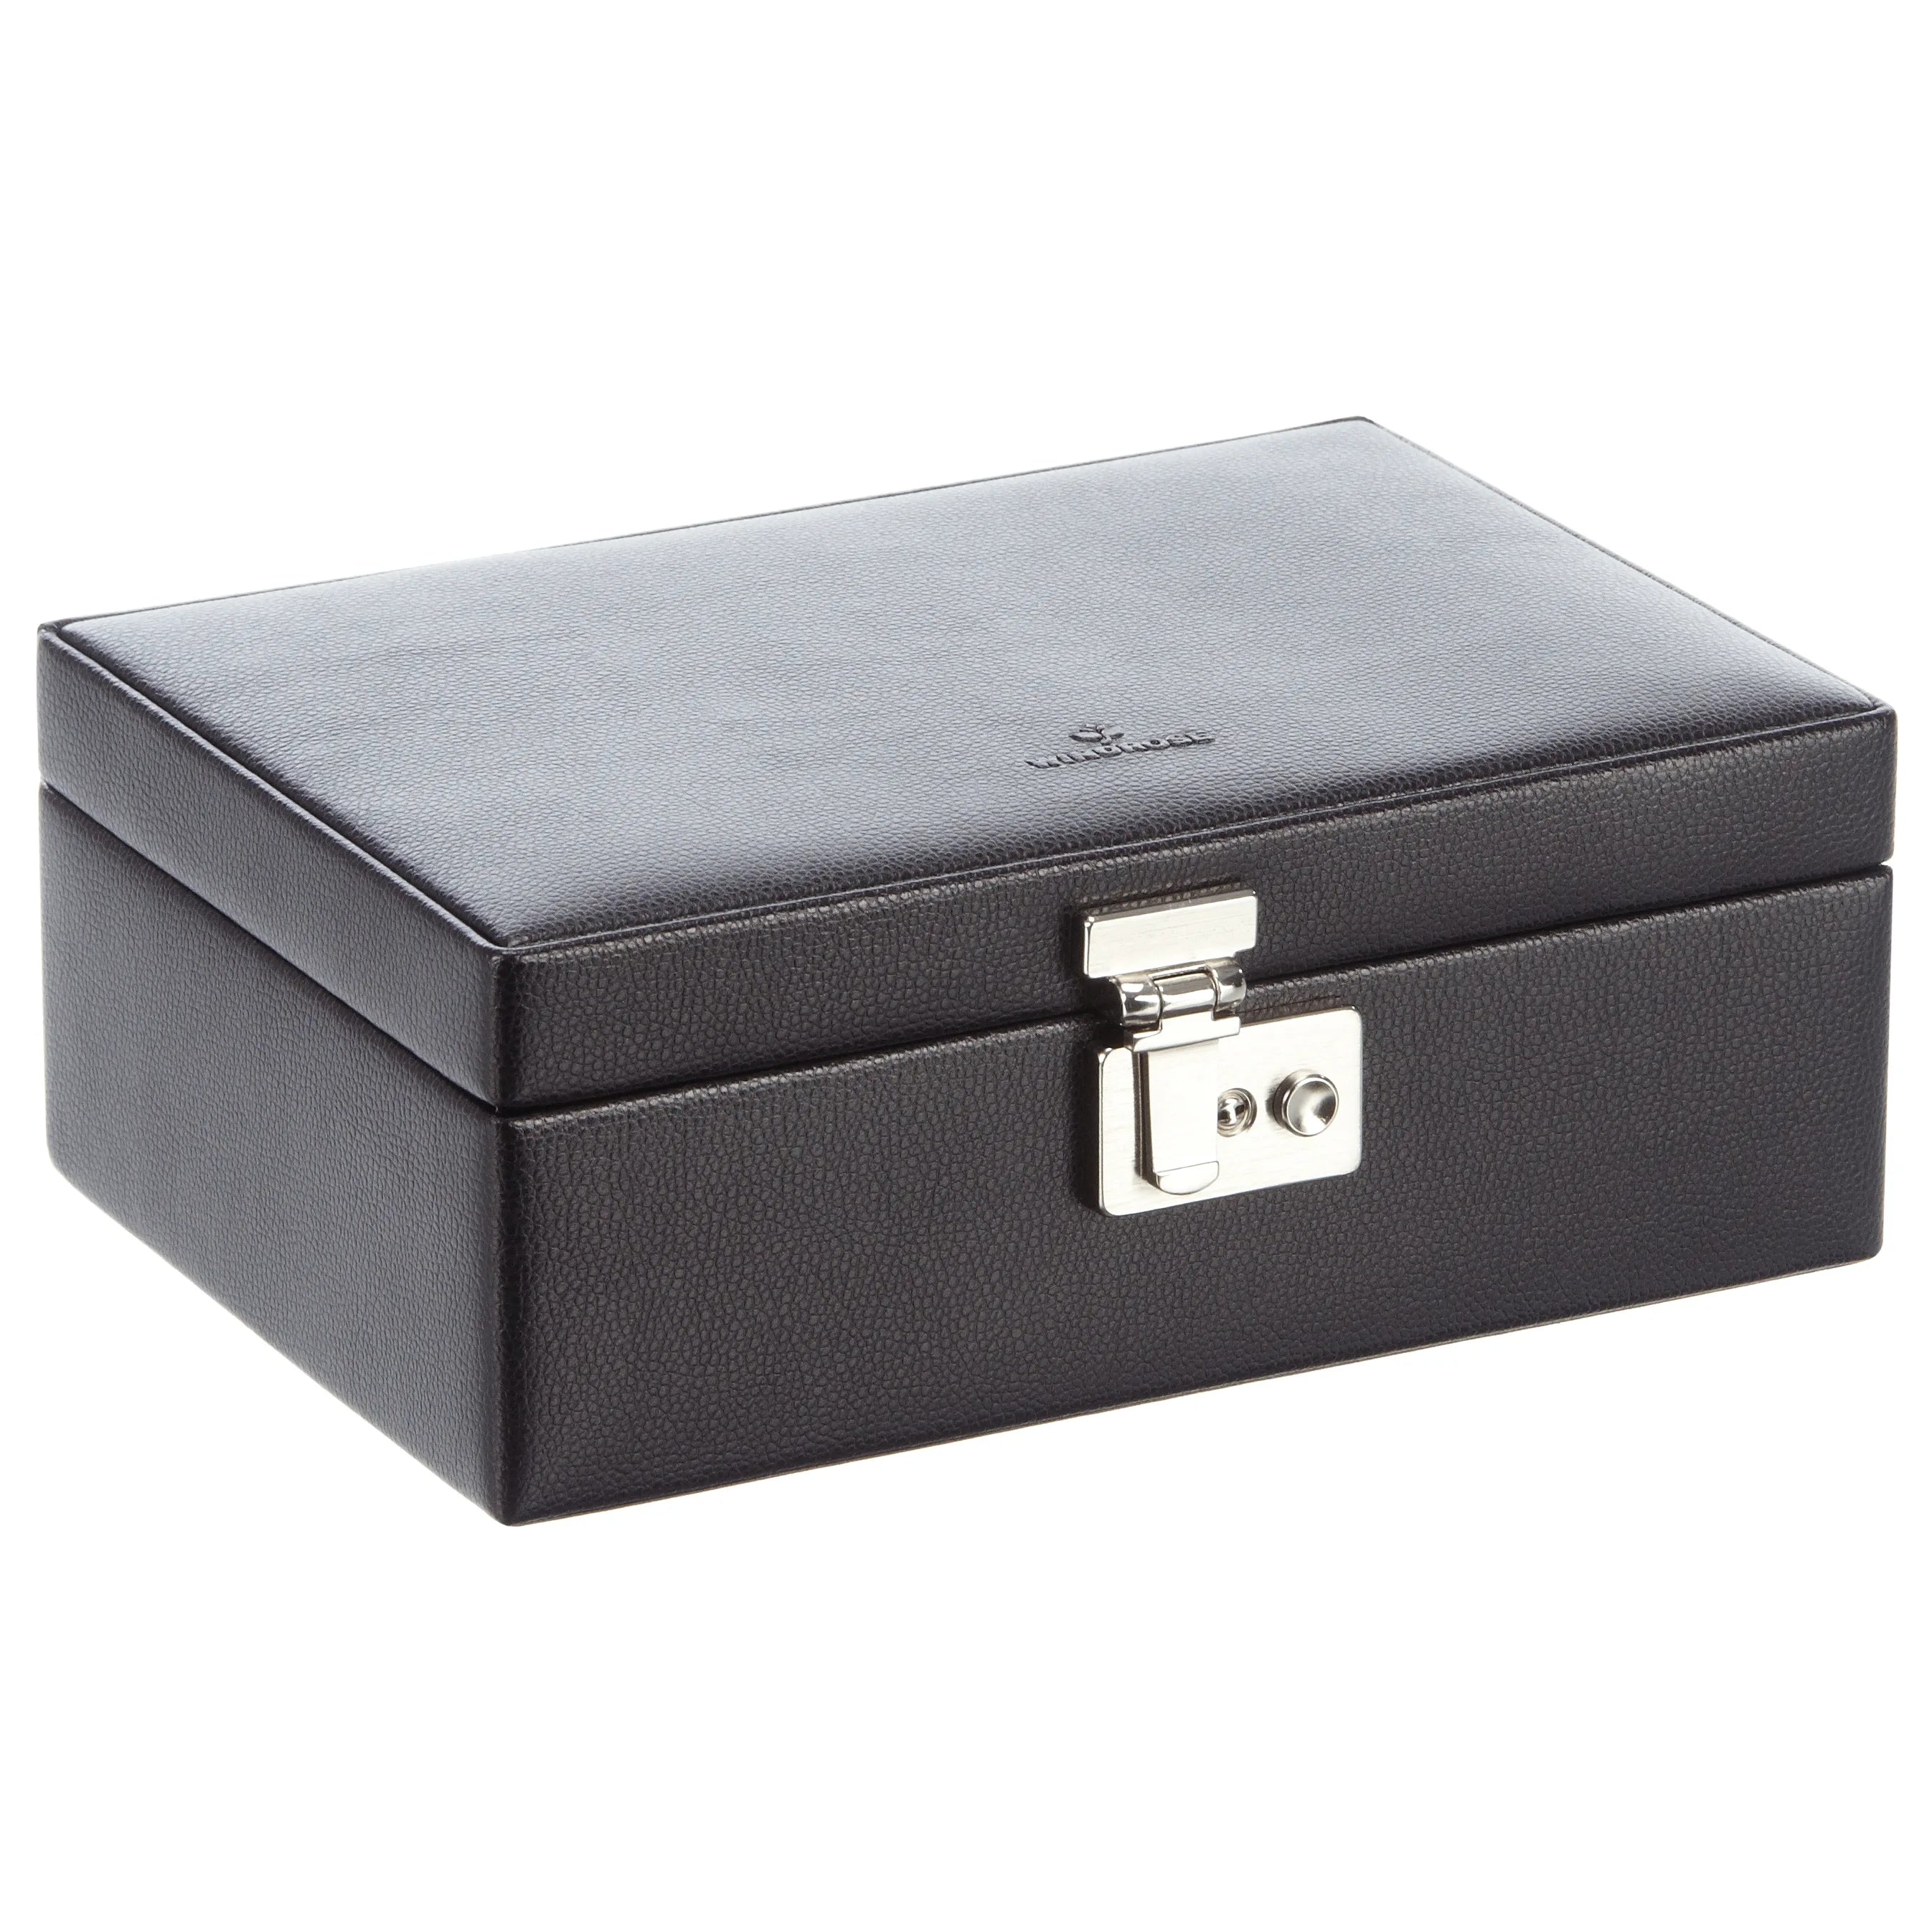 Windrose Beluga watch box for 10 watches 24 cm - black